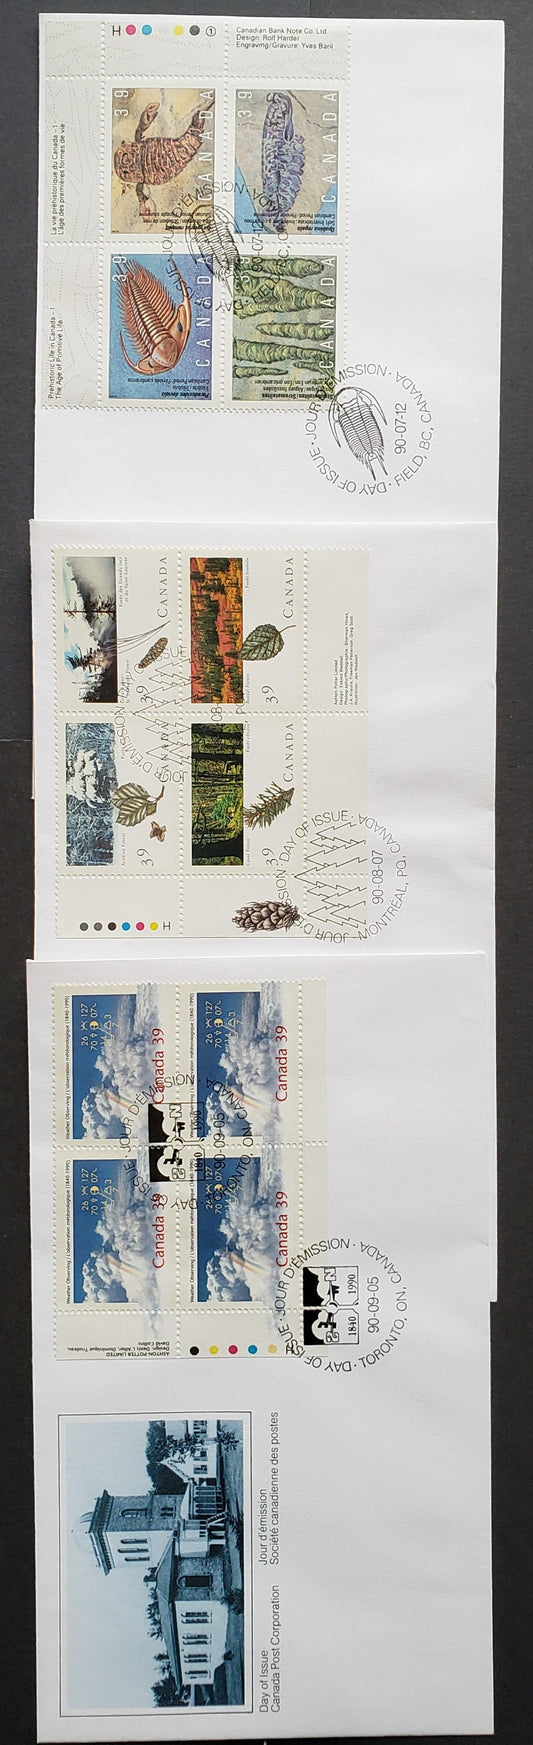 Lot 89 Canada #1282a, 1286a, 1287 39c Multicolor 1990 Prehistoric Life - Weather Observation Issues, 3 Canada Post FDC's Franked With Inscription Blocks, Generally 20,000-22,000 Of Each Issued, Cat. Value $9.45